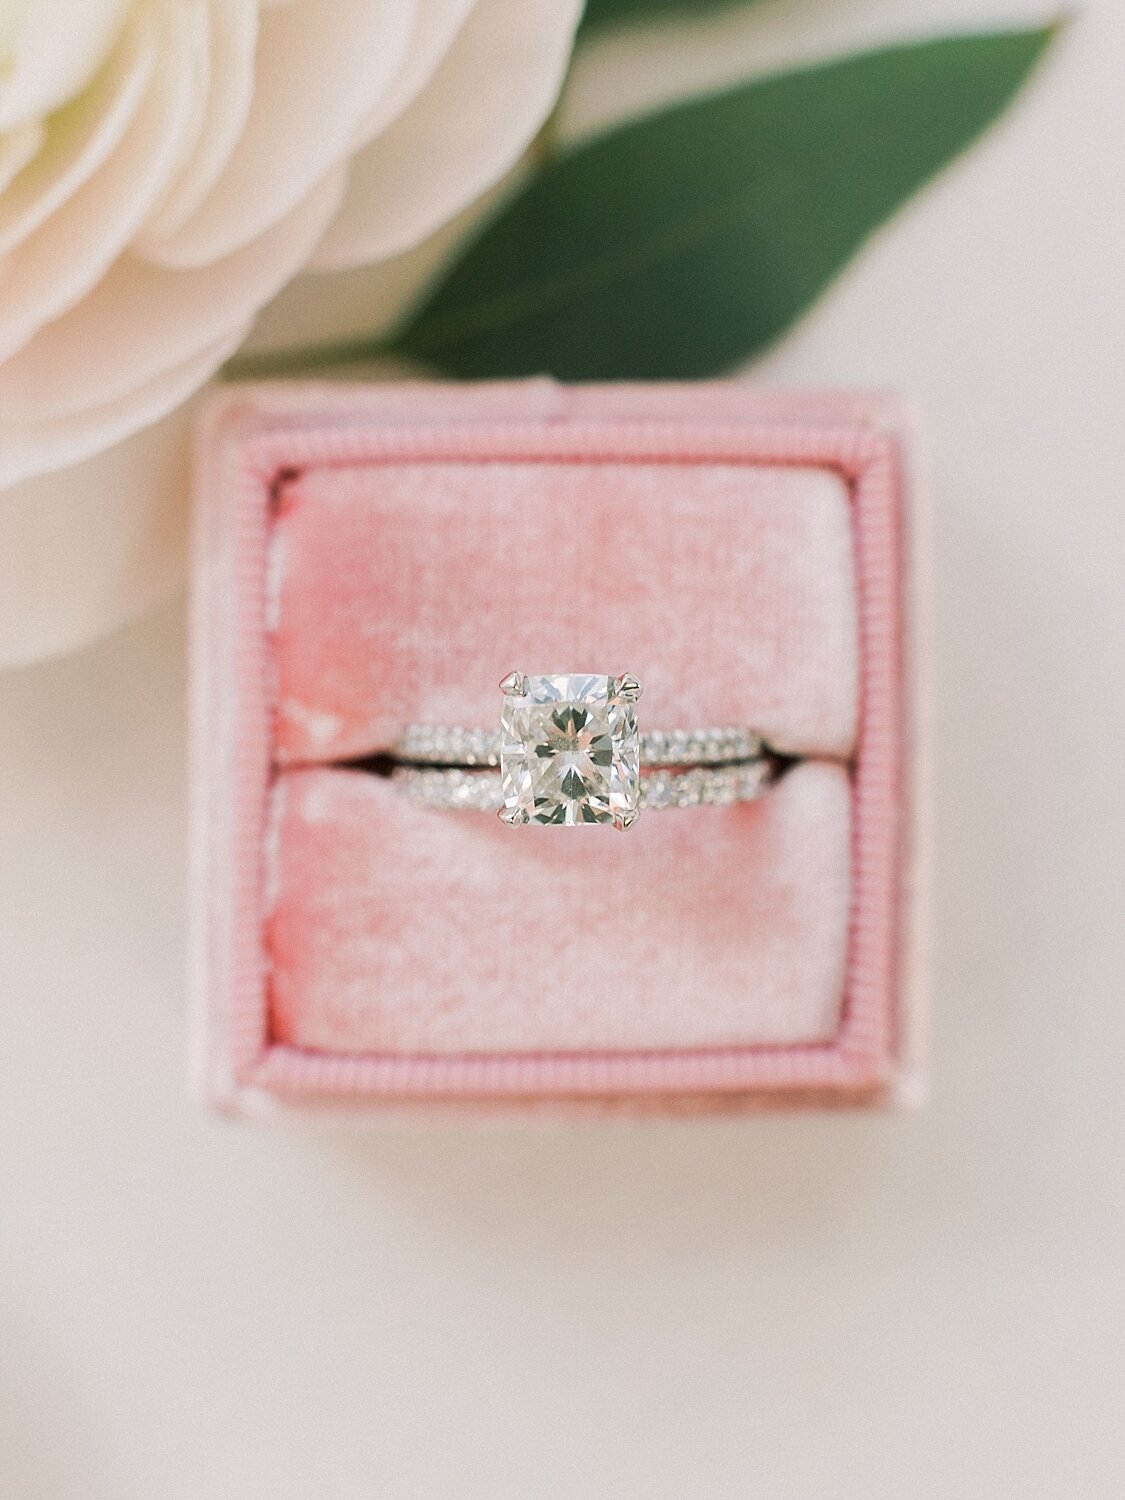 bride's engagement ring in pink box photographed by Asher Gardner Photography